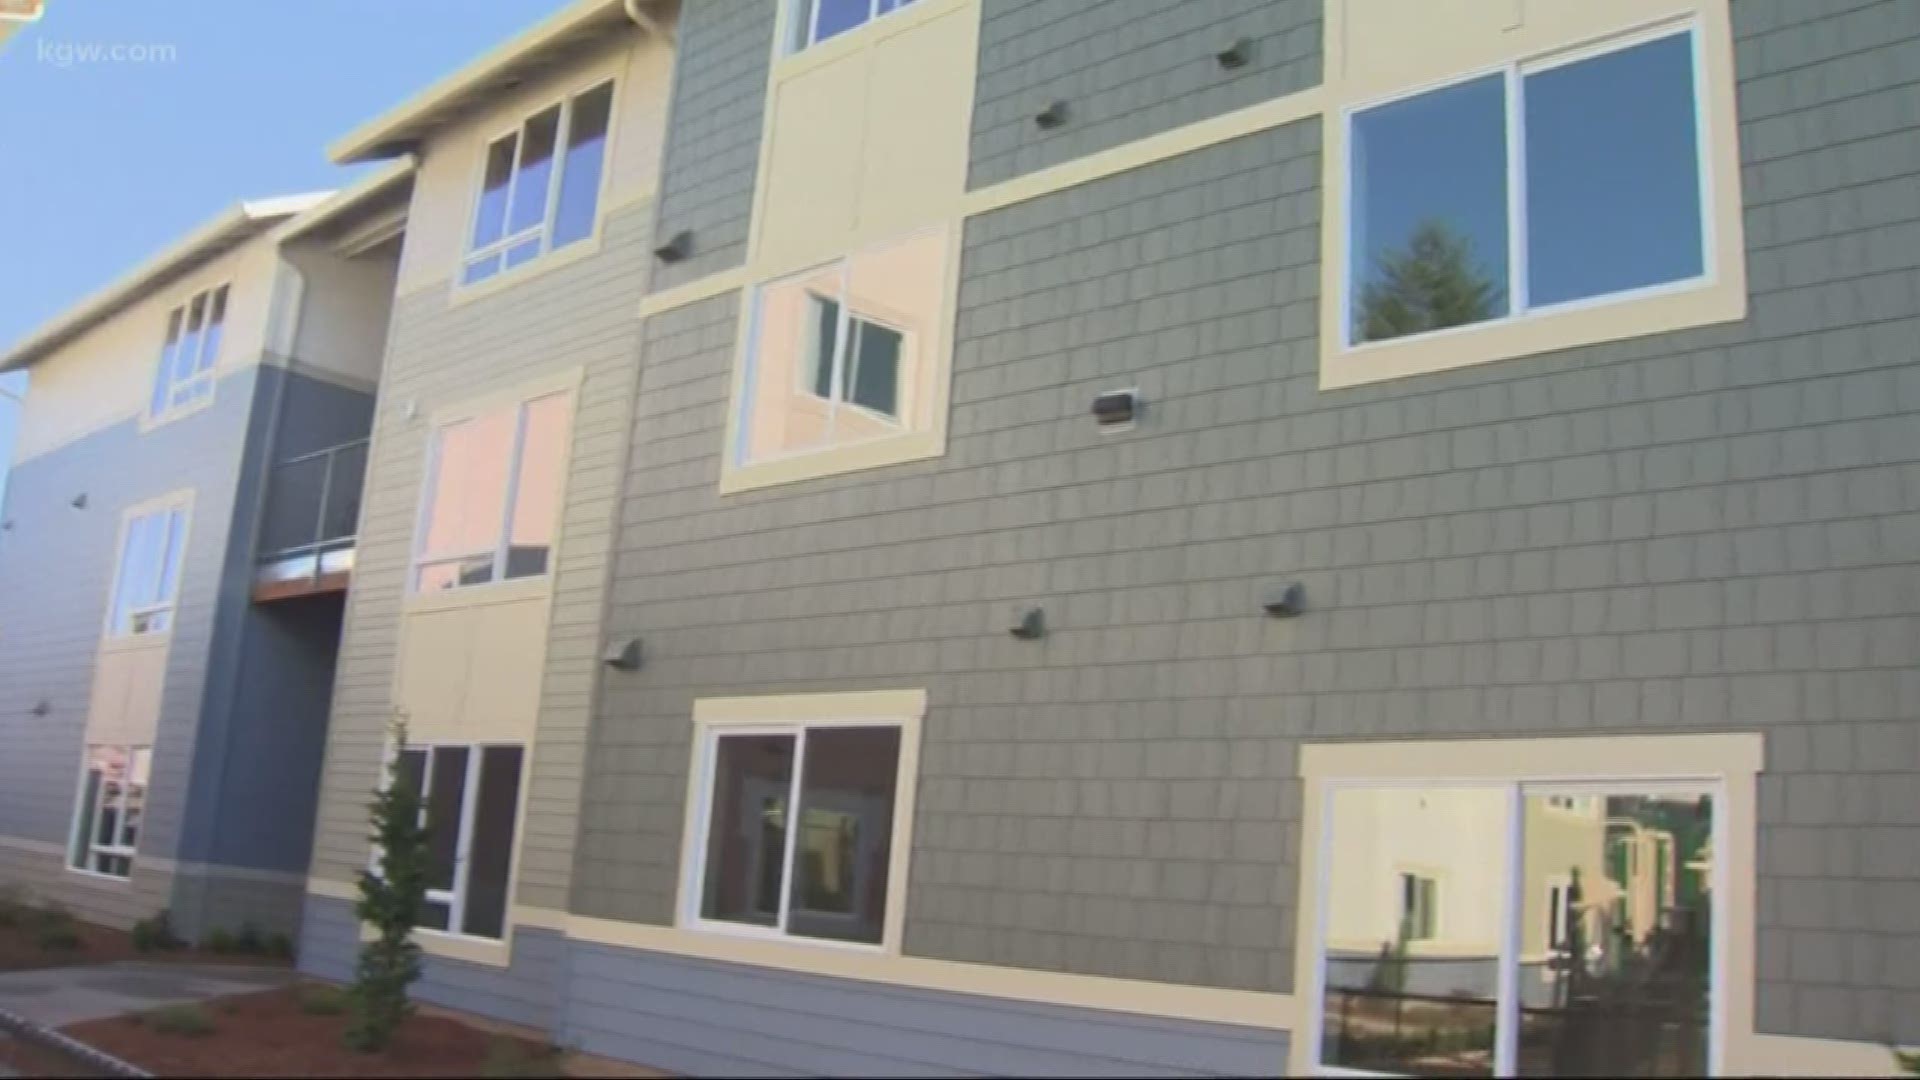 A new rental policy proposal is raising some concerns.